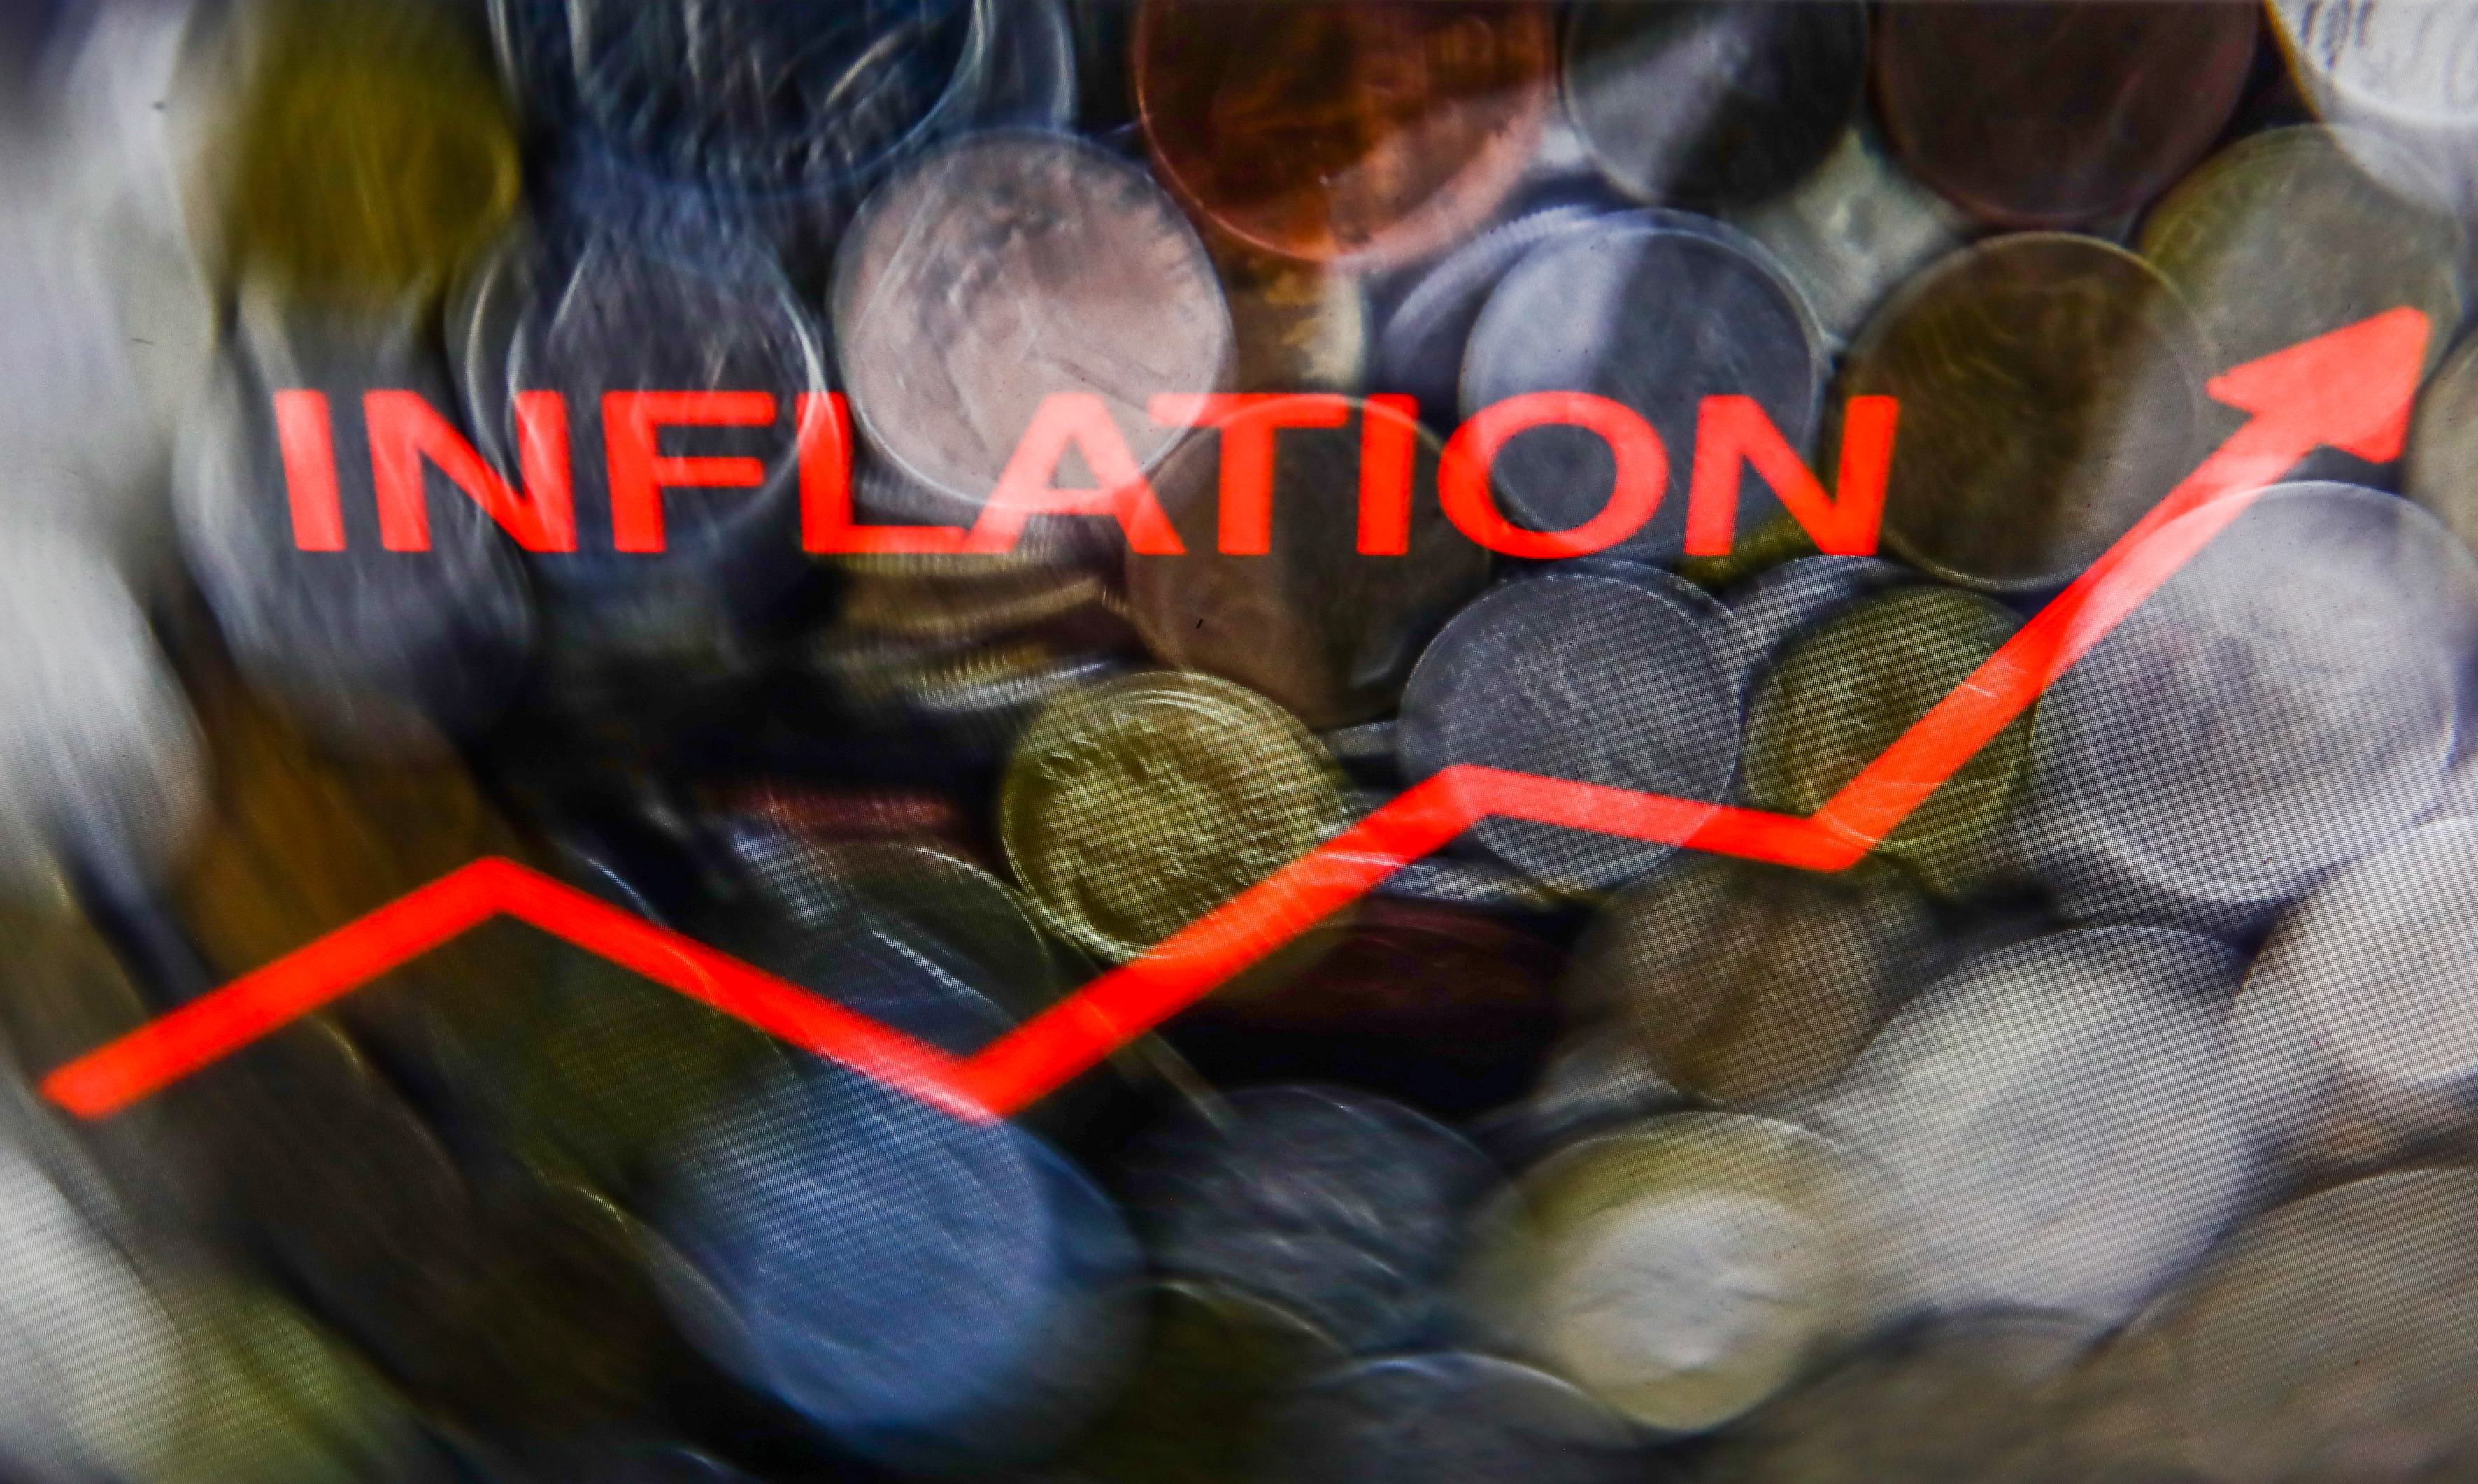 Economy Photo Illustrations As Inflation In Europe Rises